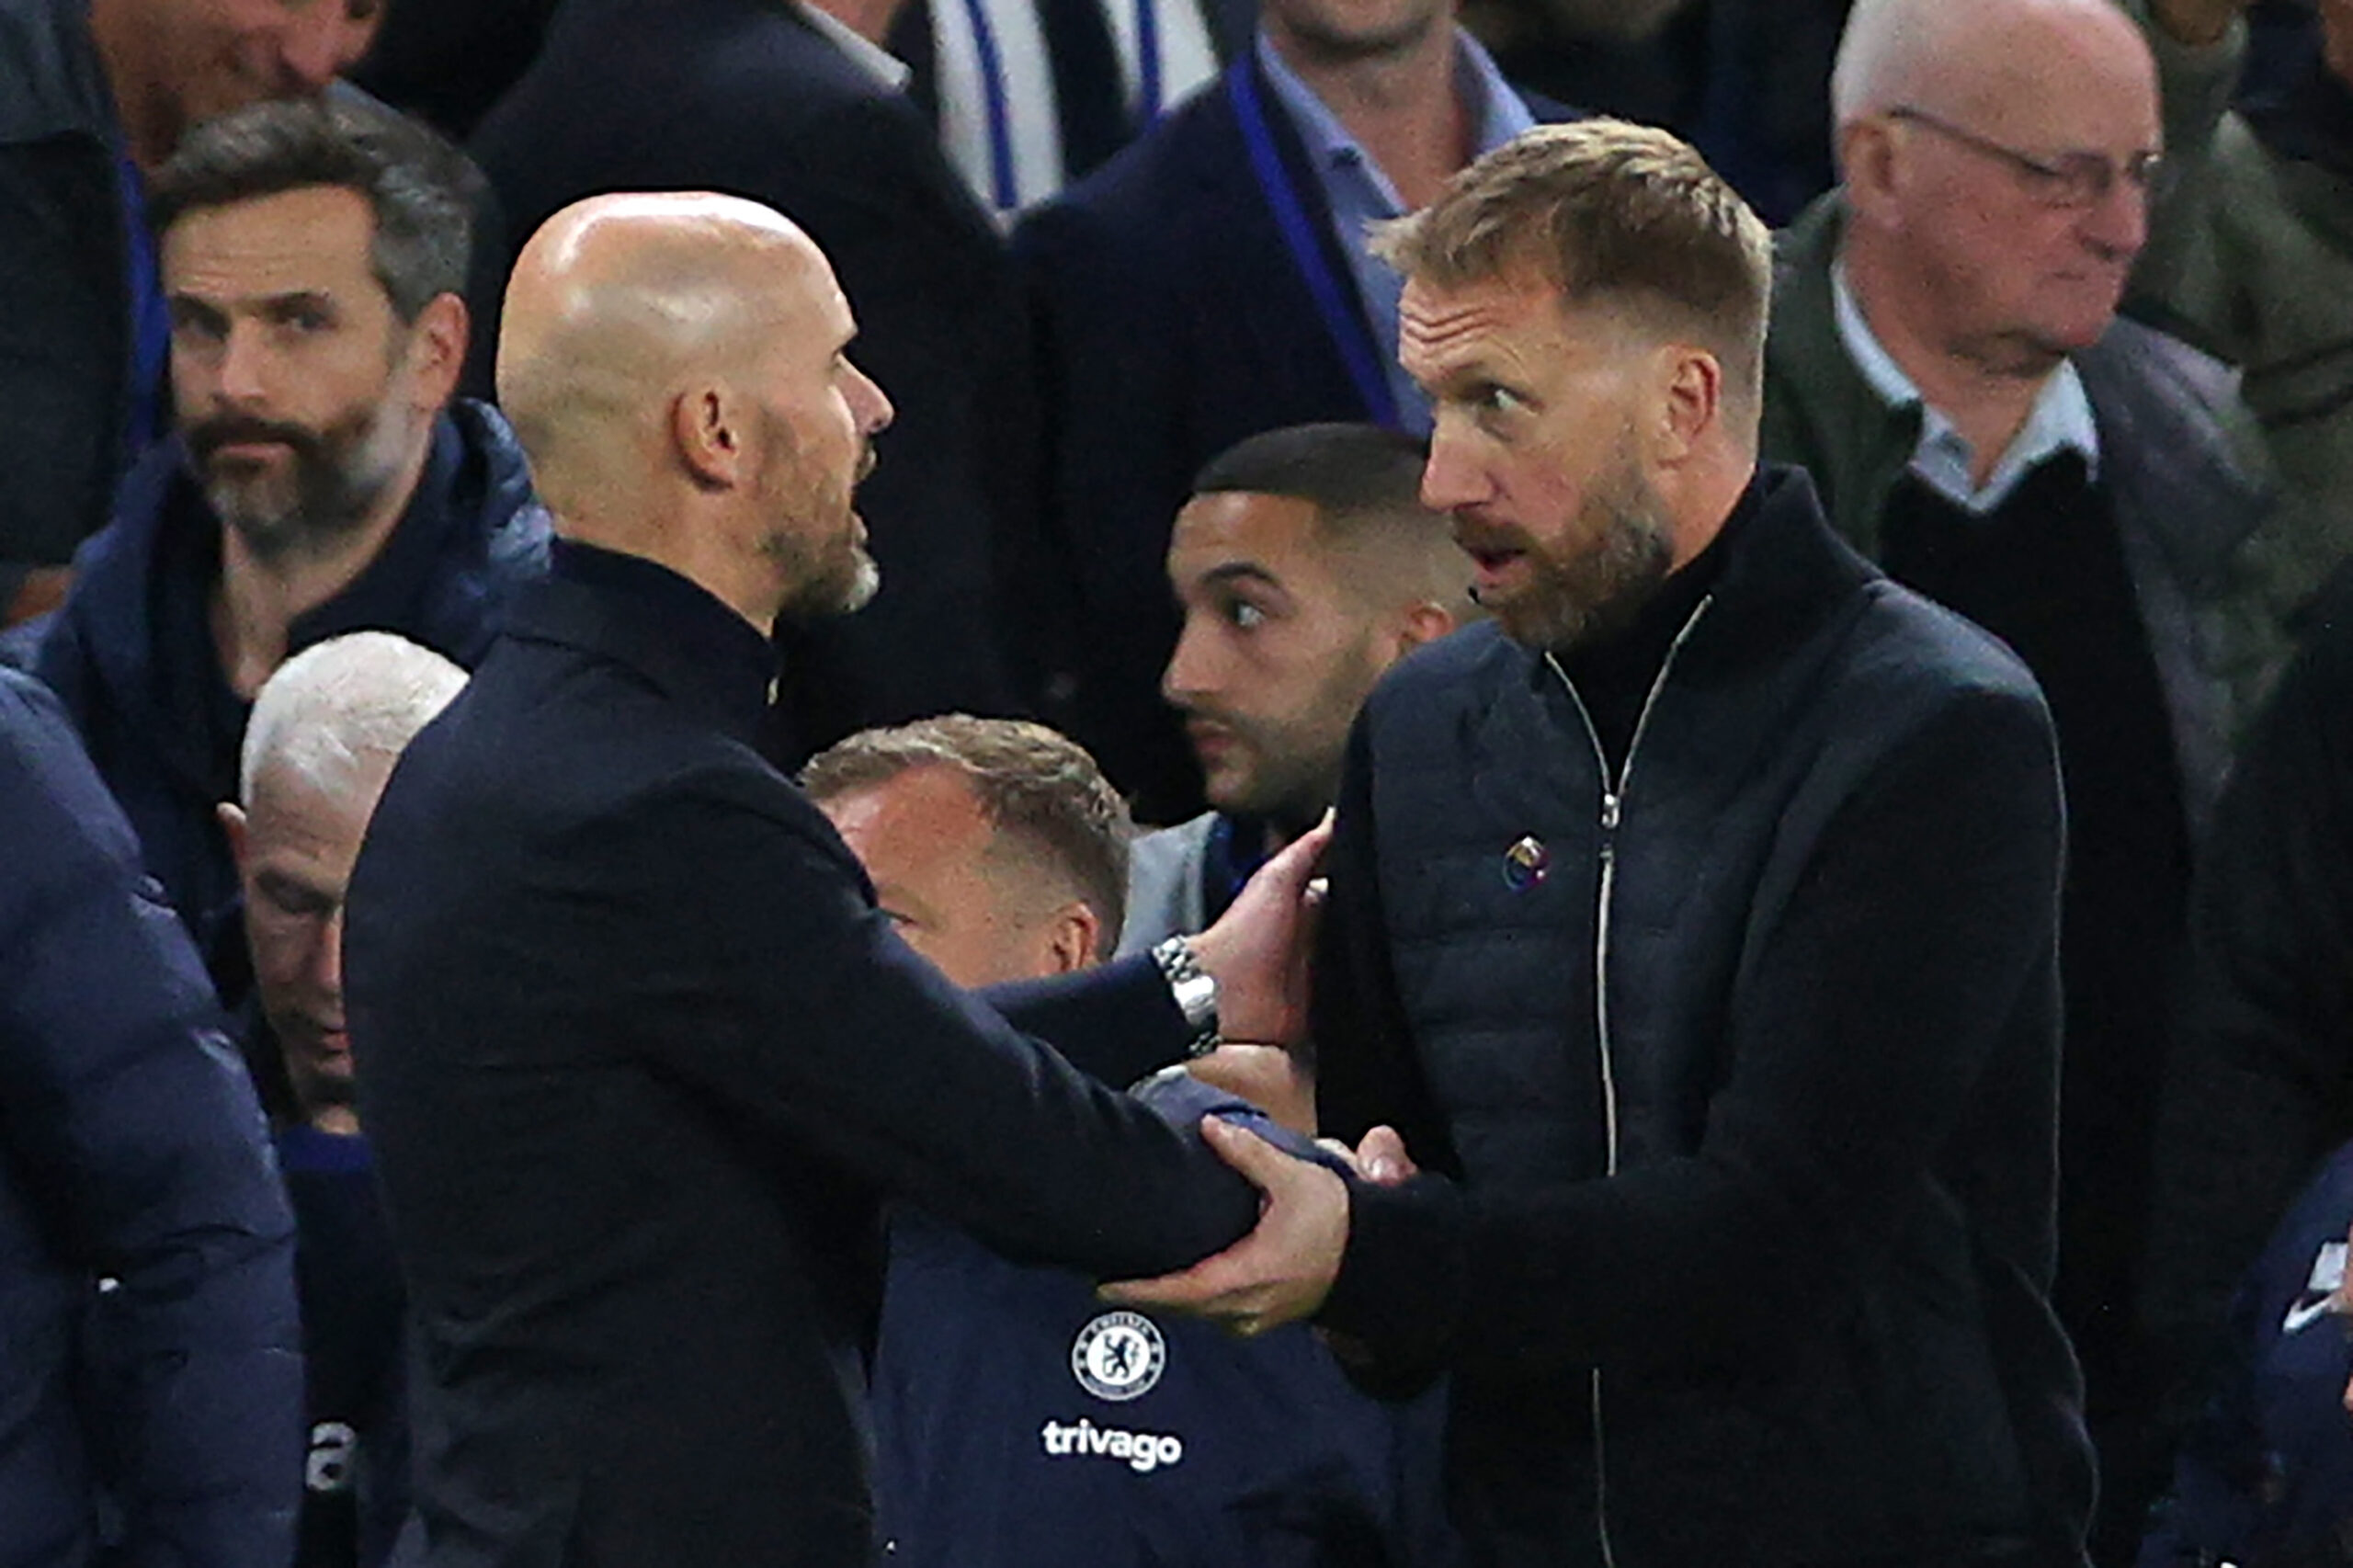 Manchester United's Dutch manager Erik ten Hag (L) and Chelsea's English head coach Graham Potter (R) shake hands after the English Premier League football match between Chelsea and Manchester United at Stamford Bridge in London on October 22, 2022. - RESTRICTED TO EDITORIAL USE. No use with unauthorized audio, video, data, fixture lists, club/league logos or 'live' services. Online in-match use limited to 120 images. An additional 40 images may be used in extra time. No video emulation. Social media in-match use limited to 120 images. An additional 40 images may be used in extra time. No use in betting publications, games or single club/league/player publications. (Photo by ADRIAN DENNIS / AFP) / RESTRICTED TO EDITORIAL USE. No use with unauthorized audio, video, data, fixture lists, club/league logos or 'live' services. Online in-match use limited to 120 images. An additional 40 images may be used in extra time. No video emulation. Social media in-match use limited to 120 images. An additional 40 images may be used in extra time. No use in betting publications, games or single club/league/player publications. / RESTRICTED TO EDITORIAL USE. No use with unauthorized audio, video, data, fixture lists, club/league logos or 'live' services. Online in-match use limited to 120 images. An additional 40 images may be used in extra time. No video emulation. Social media in-match use limited to 120 images. An additional 40 images may be used in extra time. No use in betting publications, games or single club/league/player publications. (Photo by ADRIAN DENNIS/AFP via Getty Images)